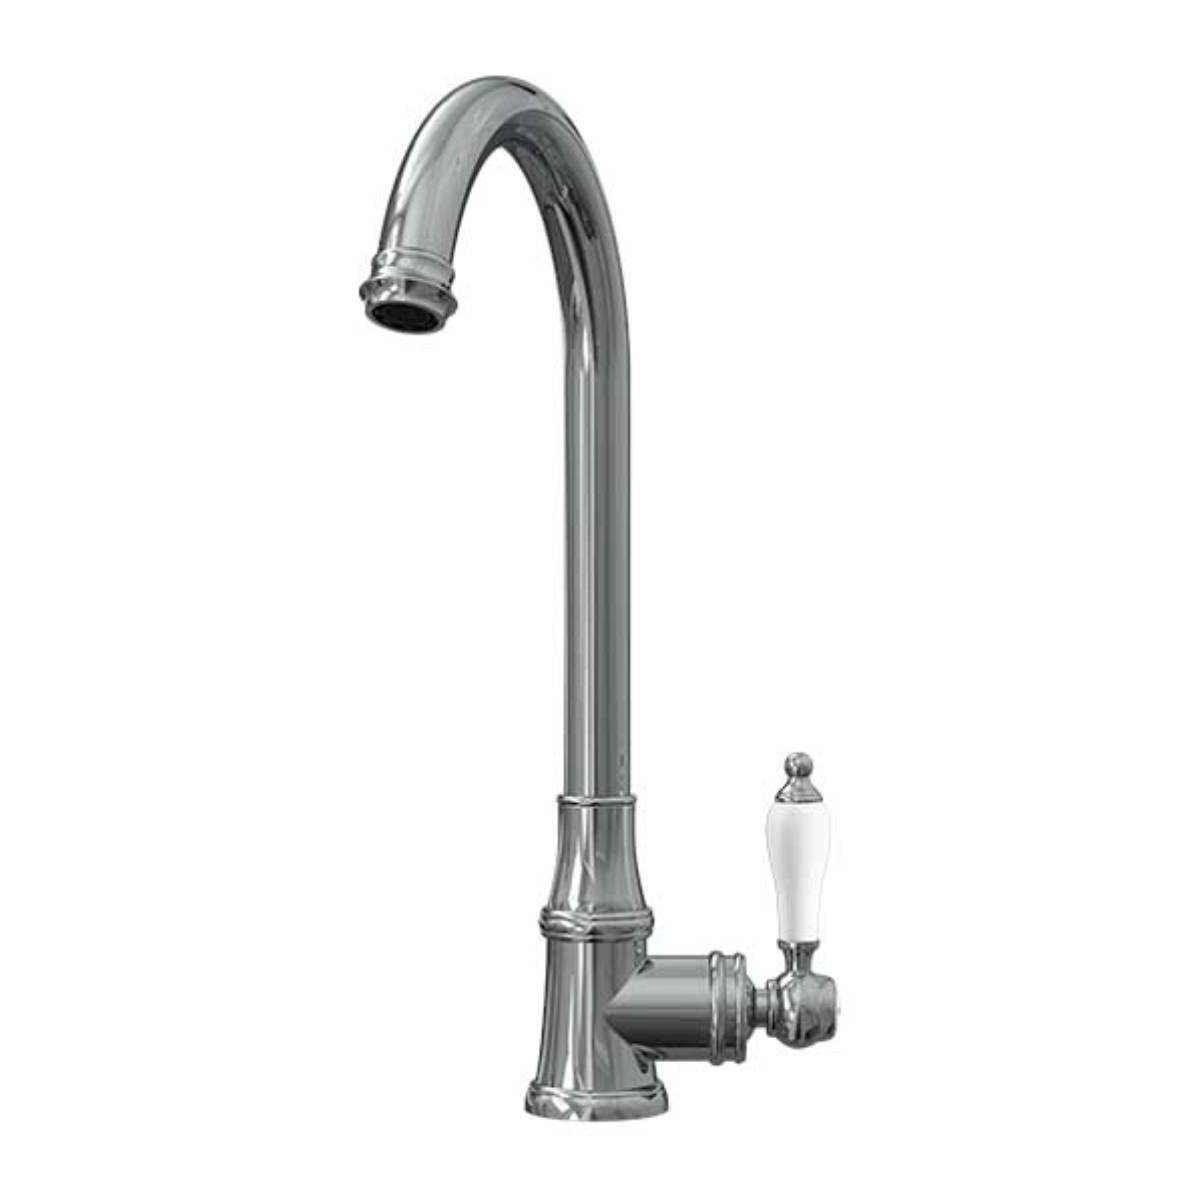 Elect Traditional Style Kitchen Sink Mixer with Swivel Spout & Single Lever - Chrome Finish (10955)